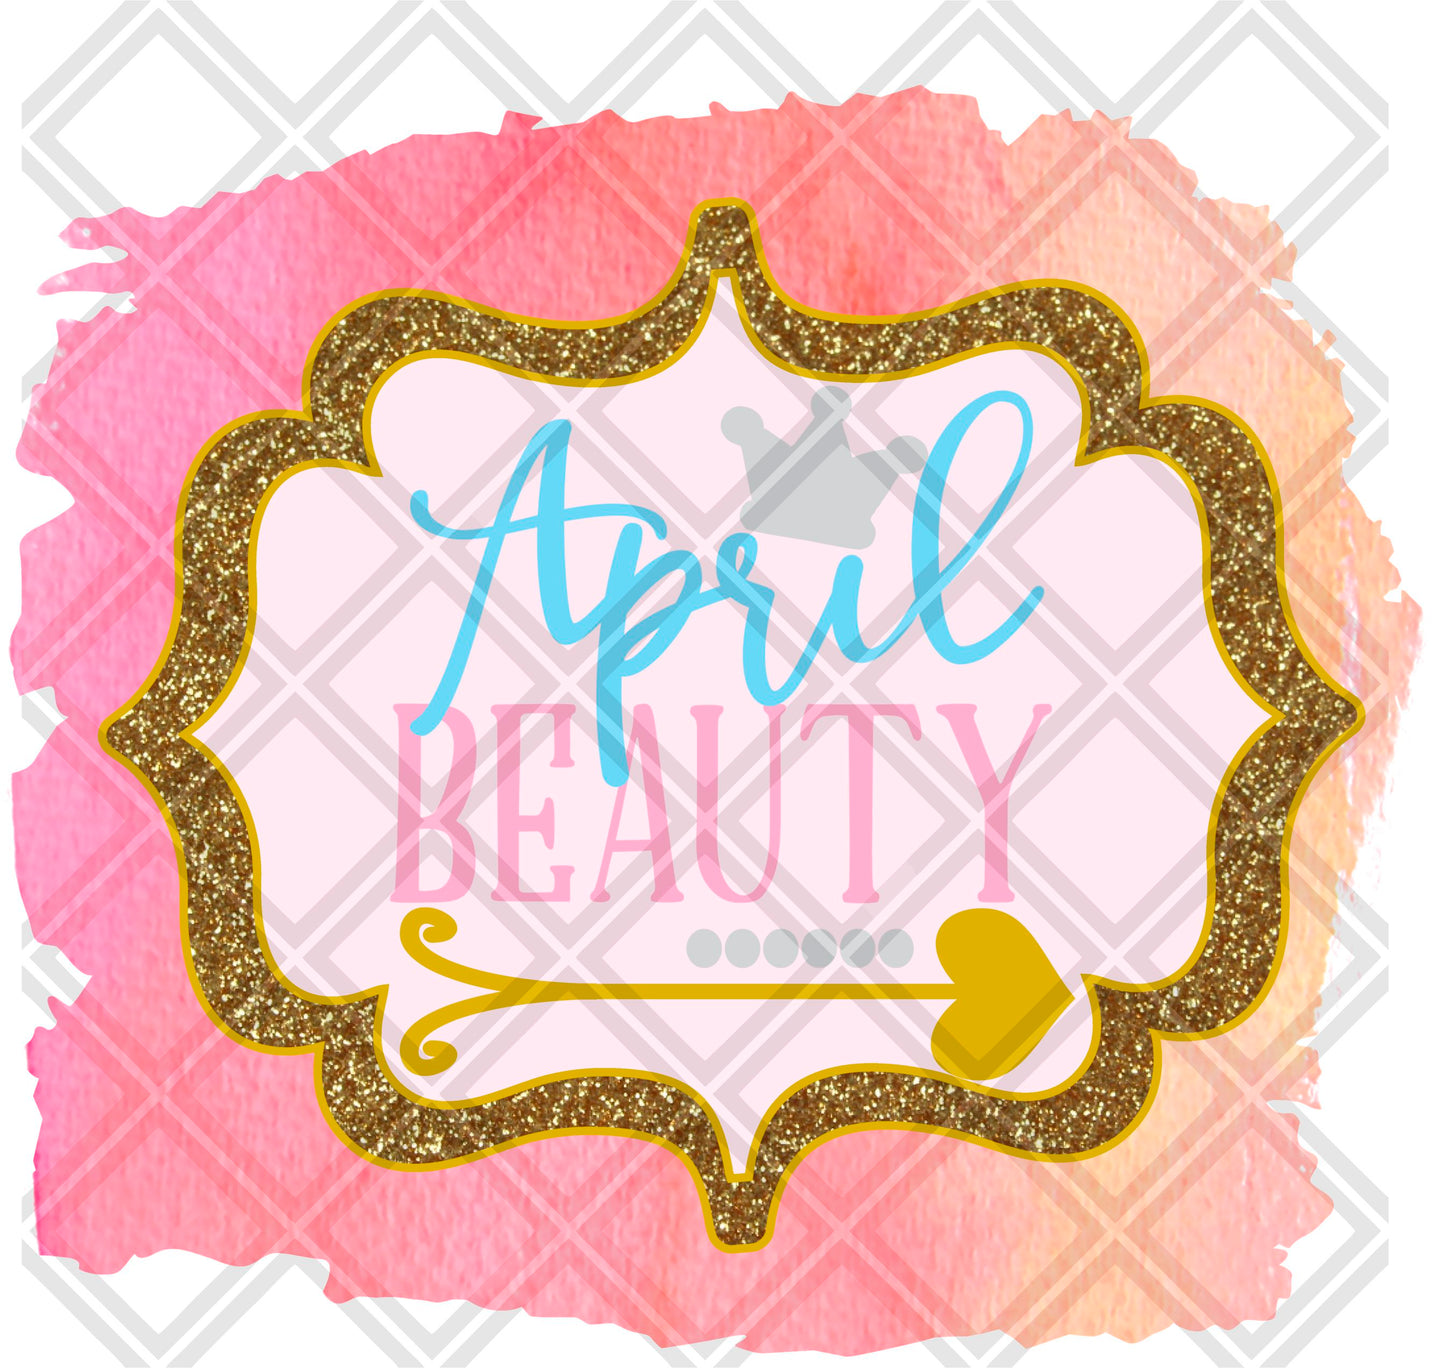 APRIL BEAUTY MONTH png Digital Download Instand Download